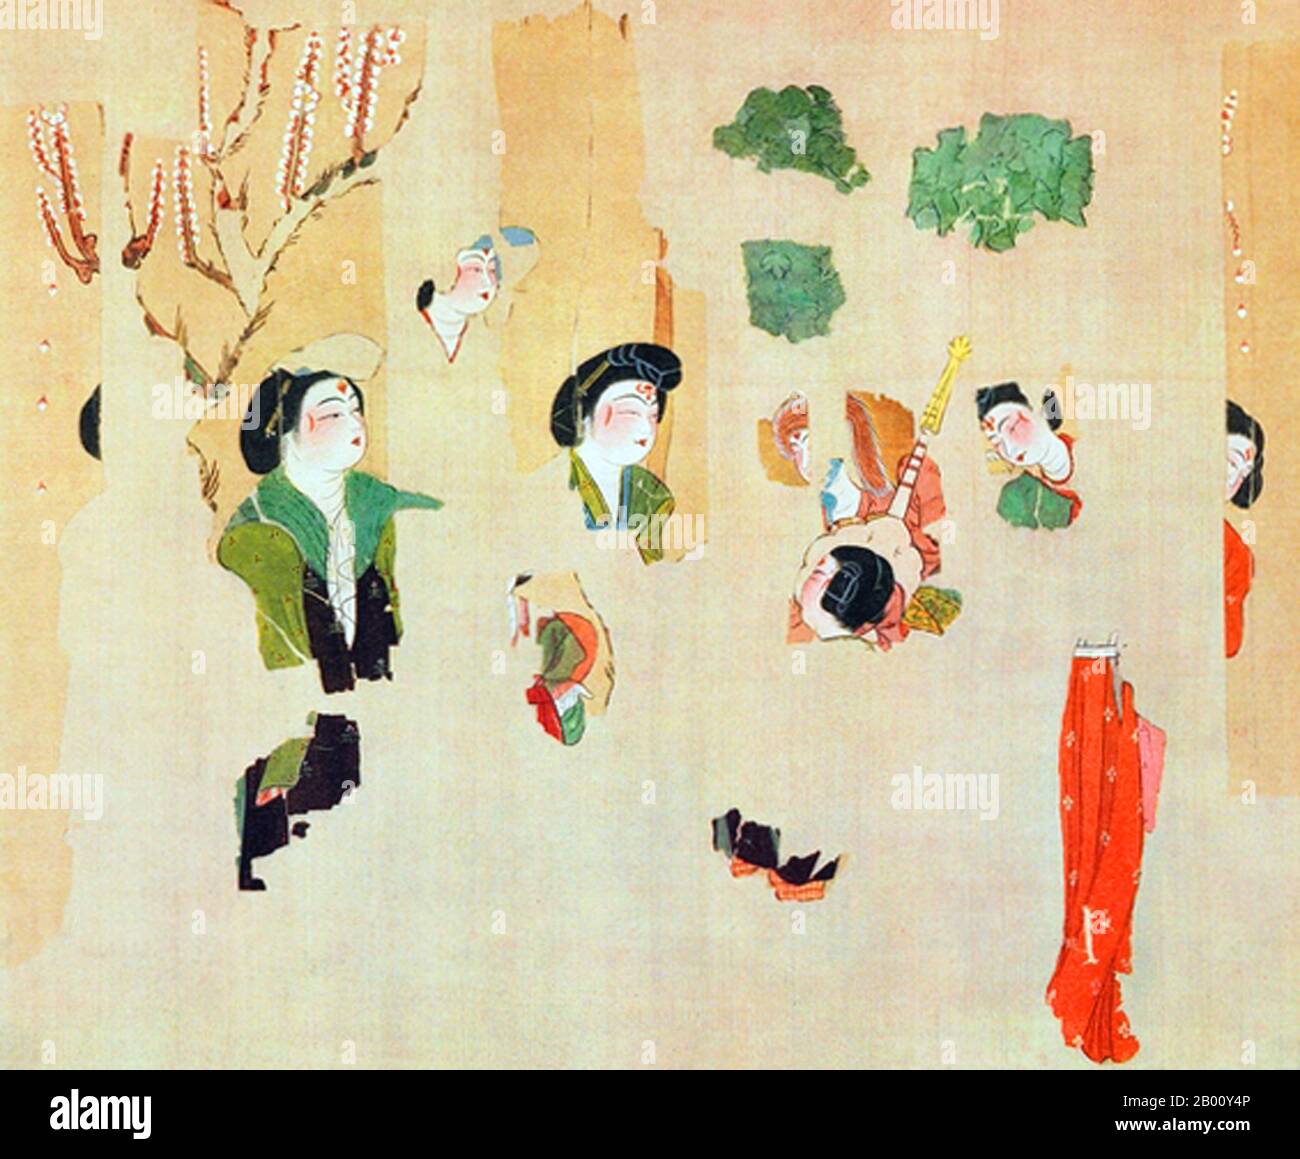 China/Silk Road: Fragments from panels of silk painting from Astana Tombs, Xinjiang.  The Astana Graves are a series of underground tombs located 6km from the ancient city of Gaochang, and 42km from Turpan, in Xinjiang, China. The tombs were used by the inhabitants of Gaochang, both commoners and locals, for about 600 years from 200 CE – 800 CE.  The complex covers 10 square kilometers and contains over 1,000 tombs. Different plots for separate castes and families are marked by gravel dividers. Due to the arid environment many important artifacts have been well preserved at the tombs. Stock Photo